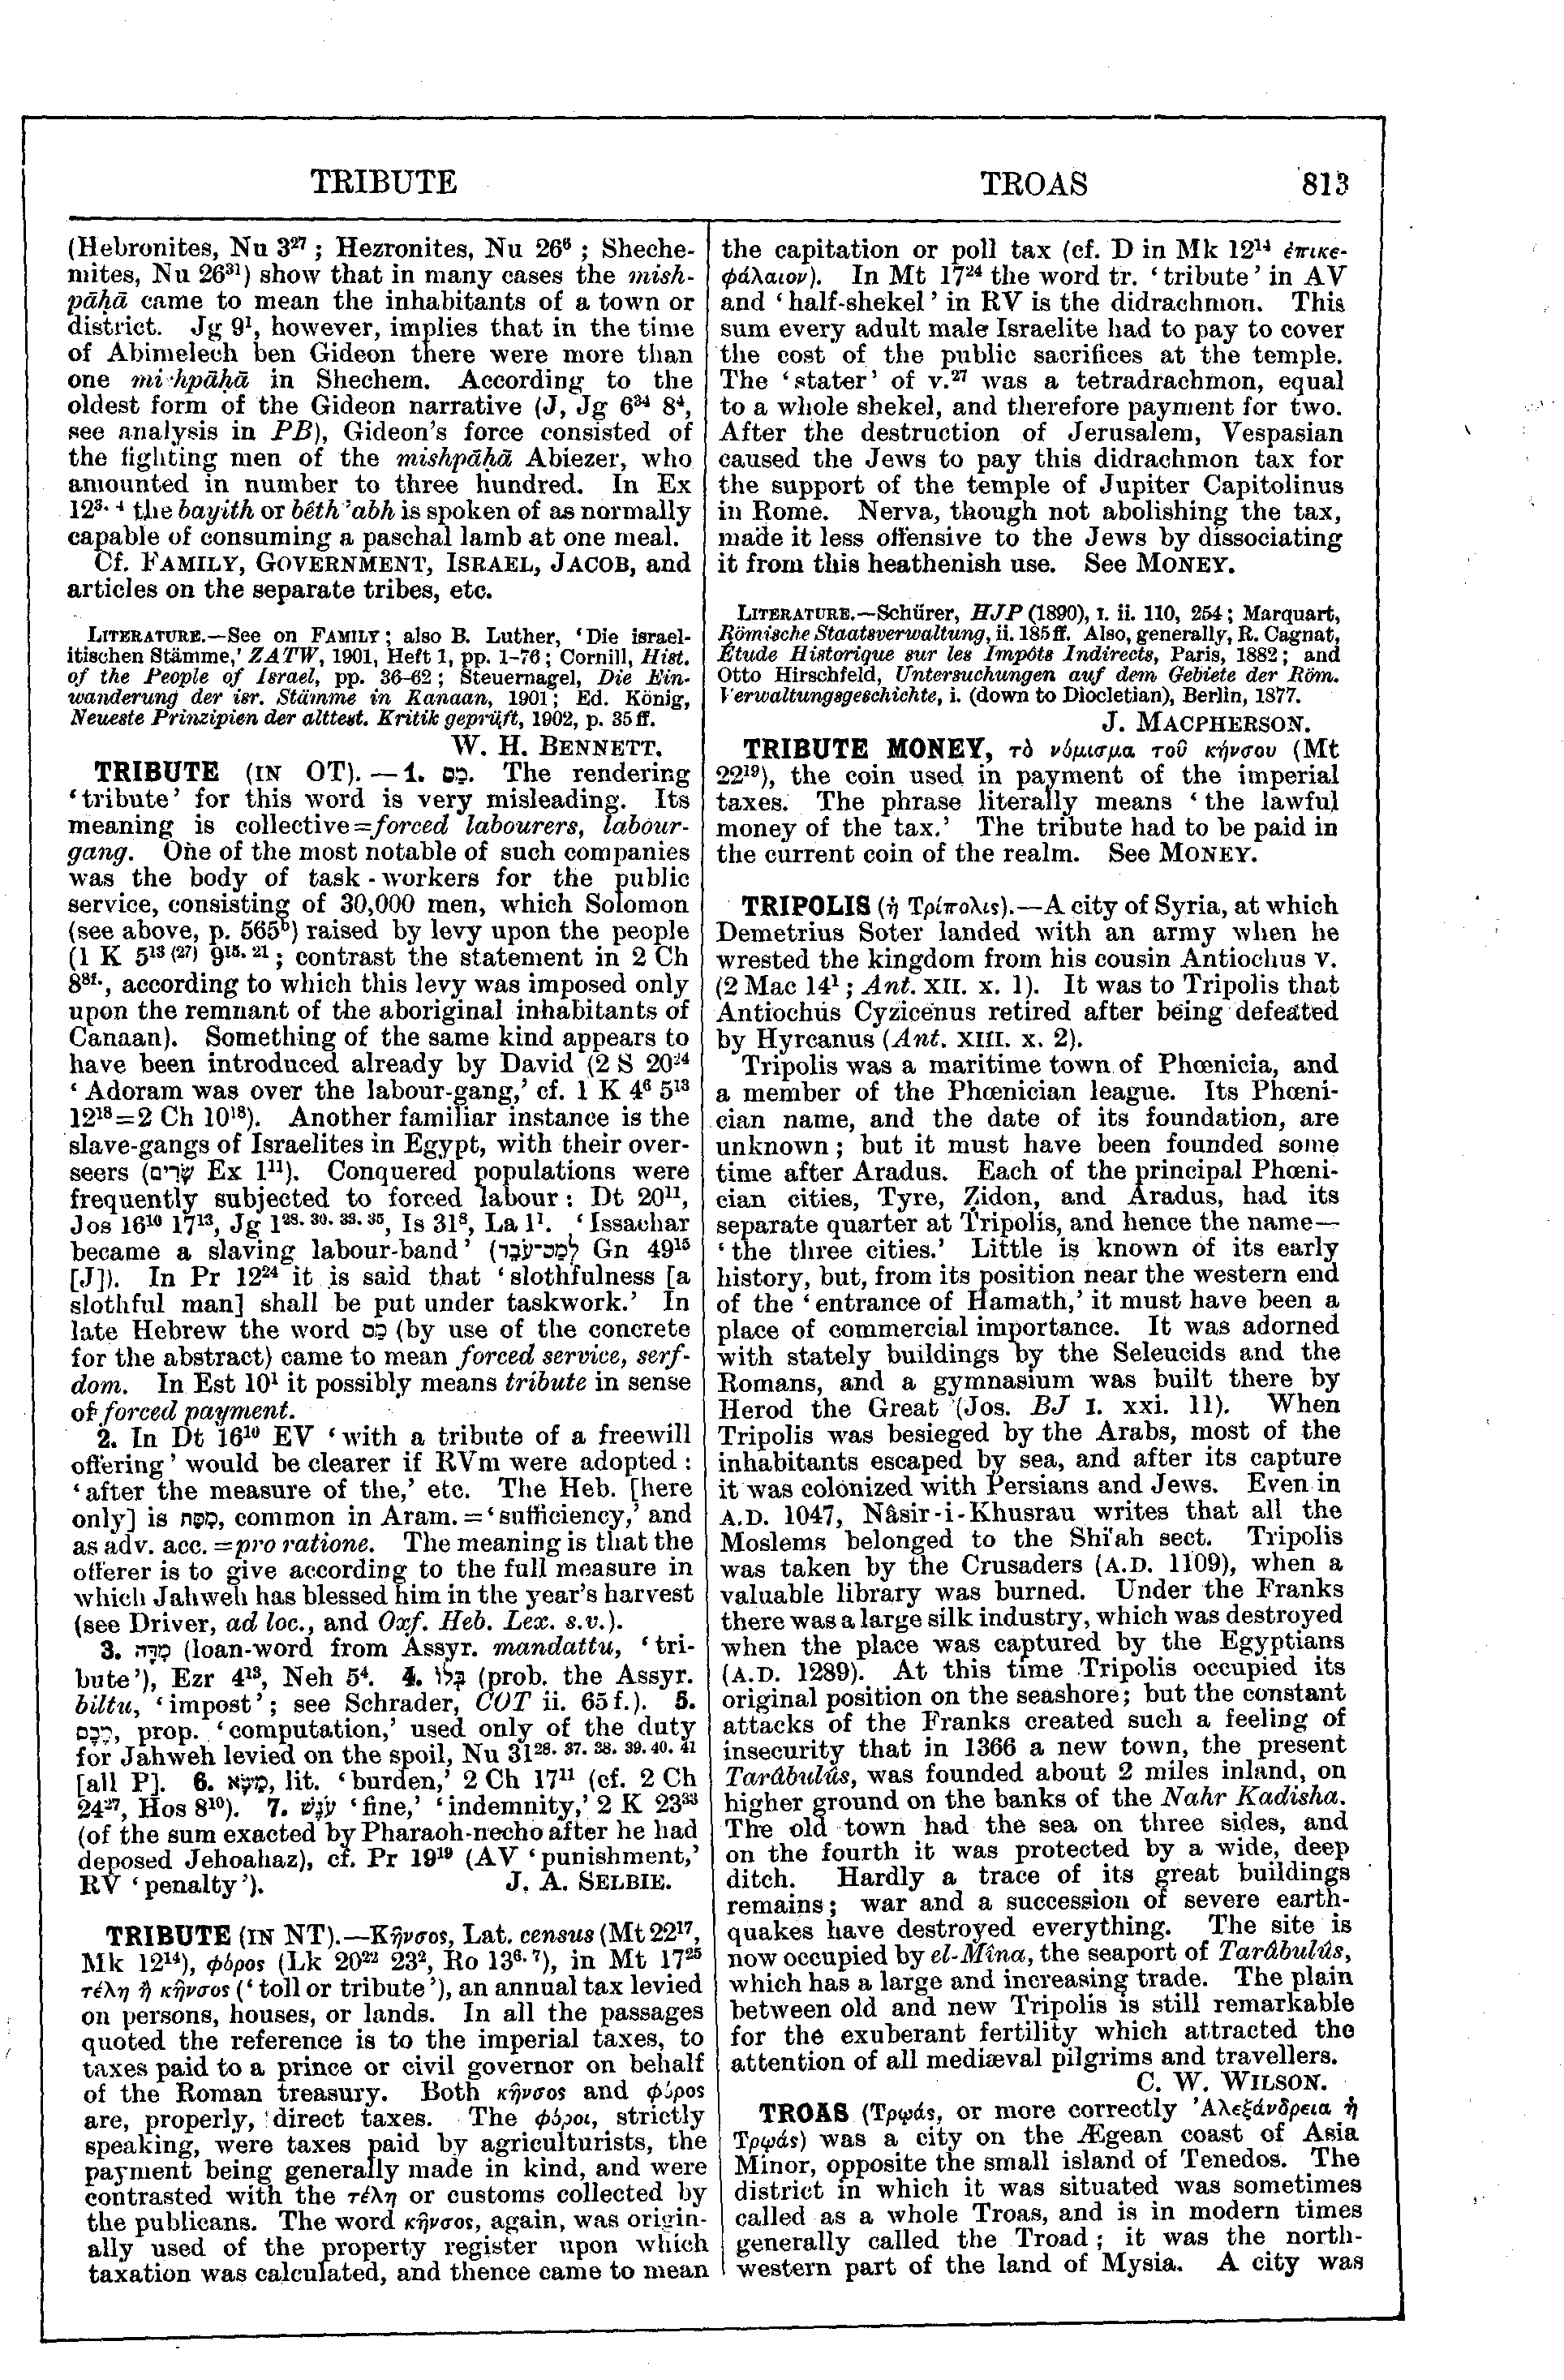 Image of page 813